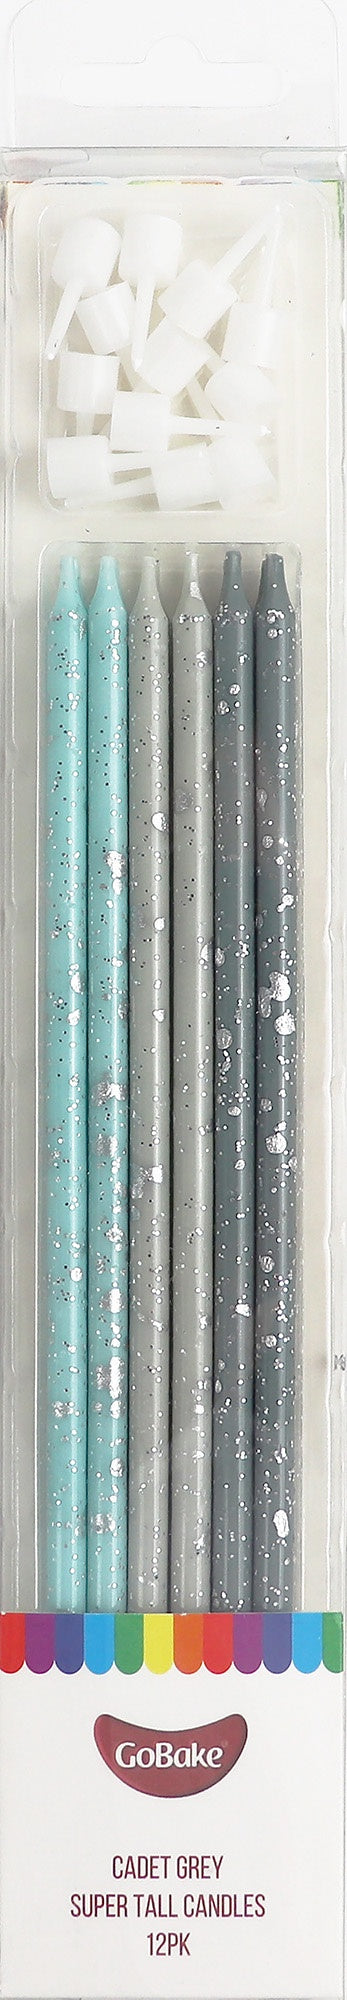 Super Tall GoBake Candles - Ombre Cadet Grey